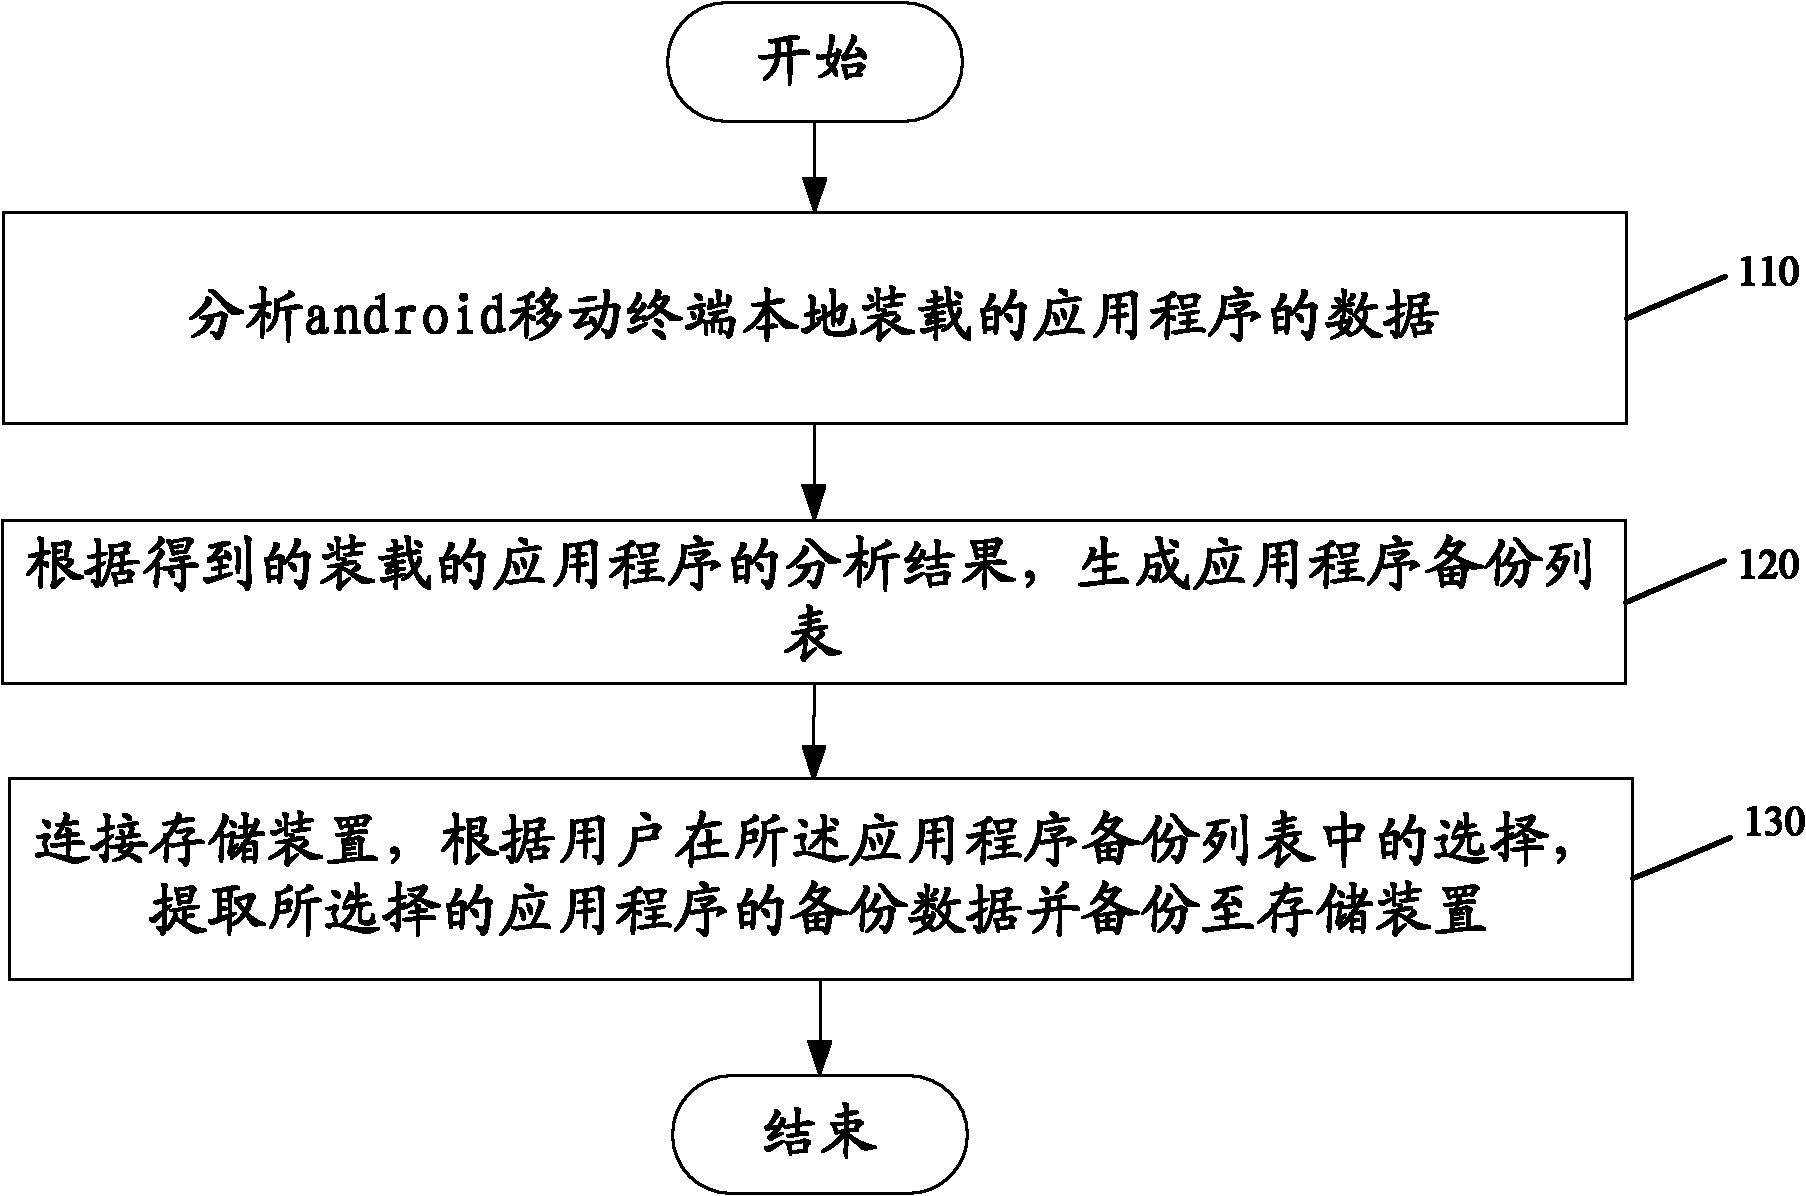 Android system-based application program backup and recovery method